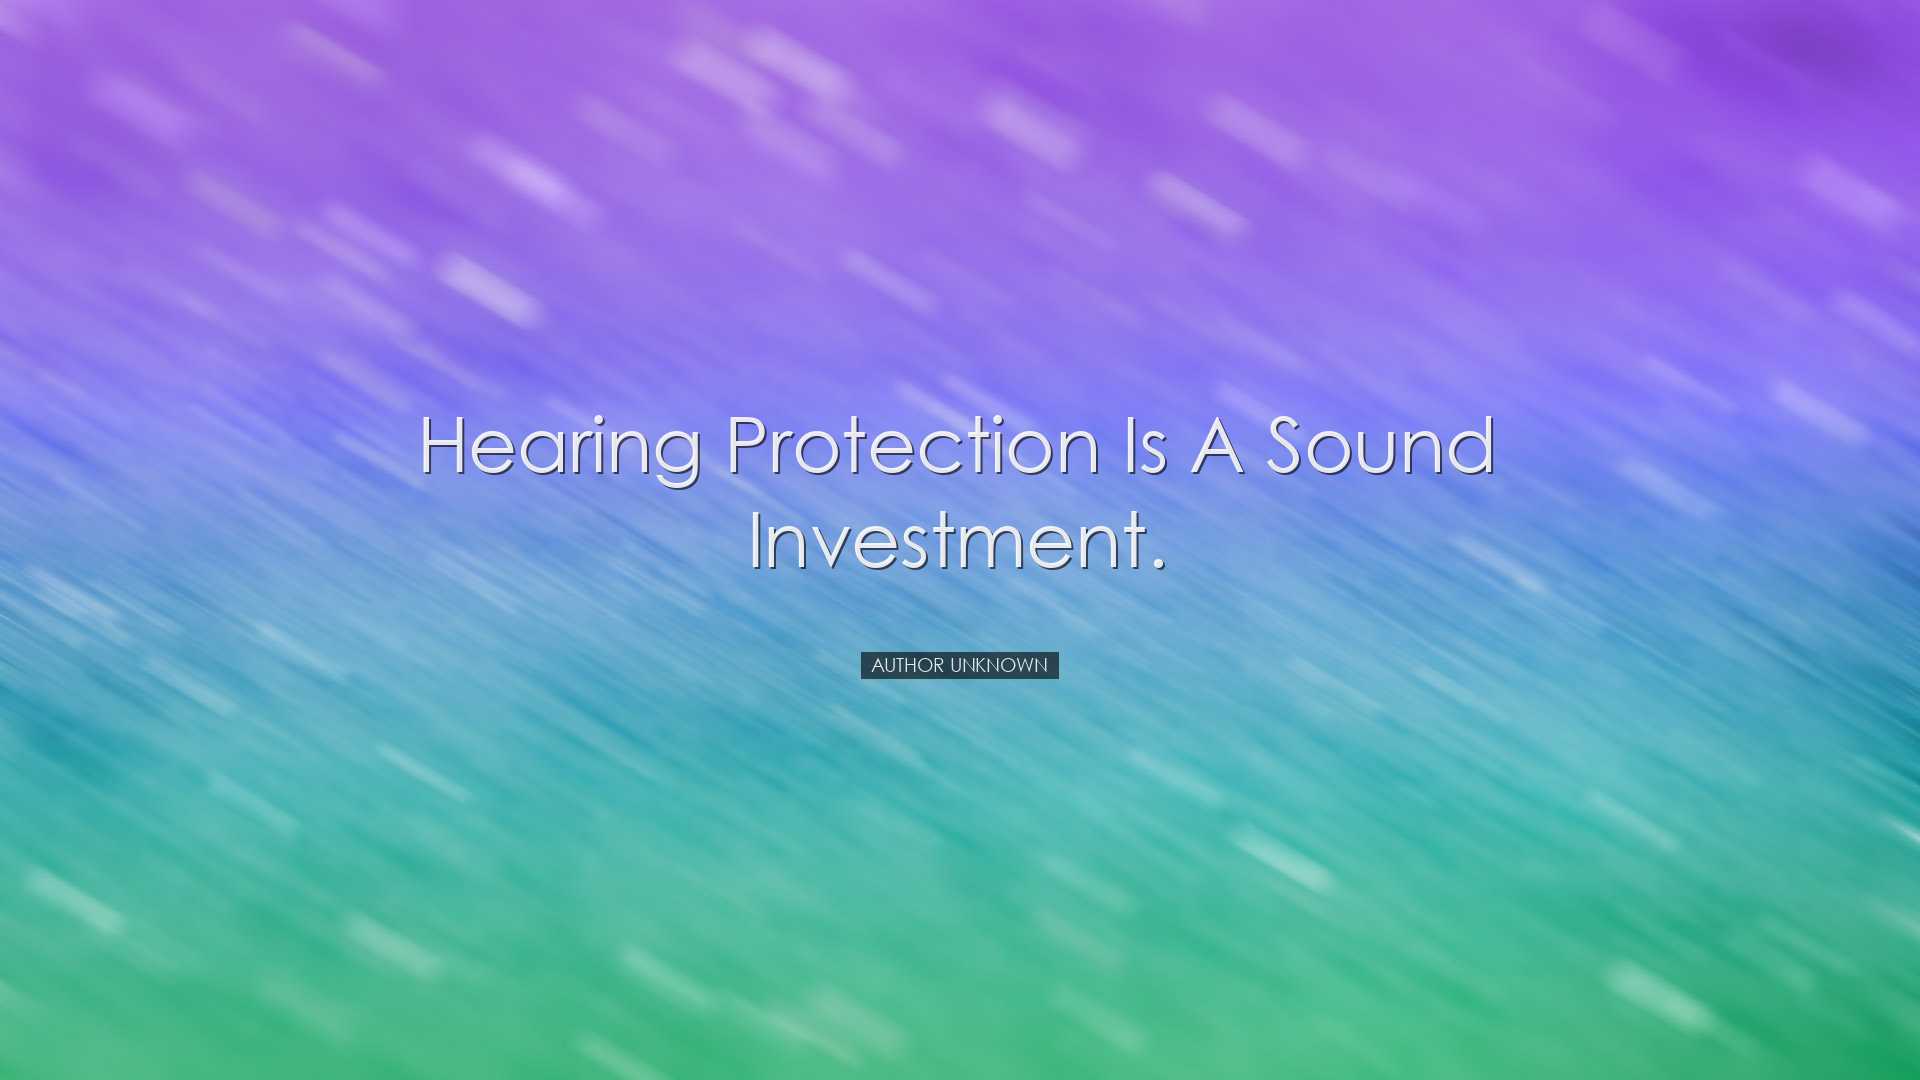 Hearing protection is a sound investment. - Author unknown